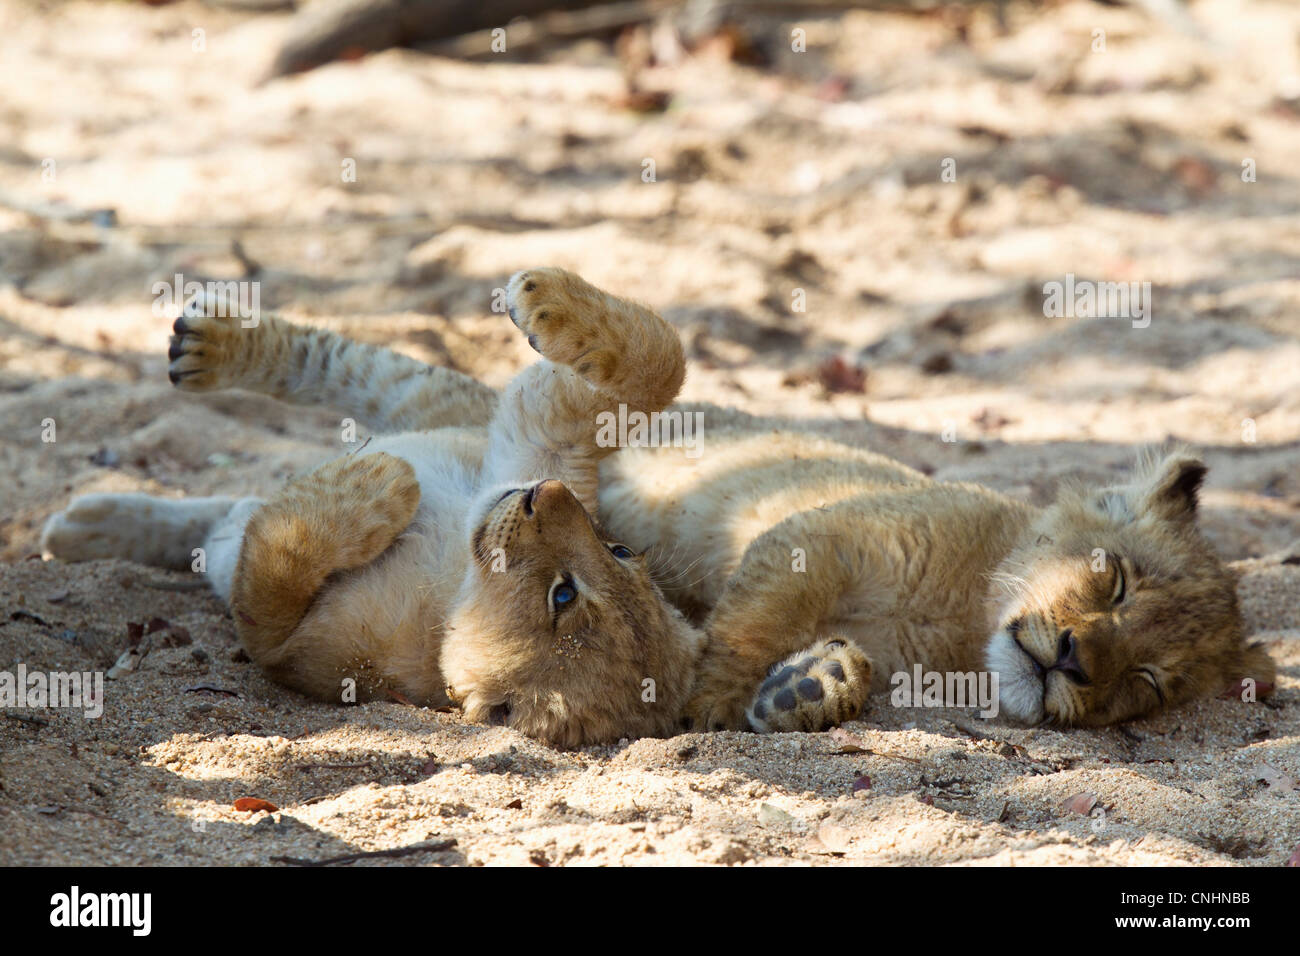 A playful lion cub lying next to another cub sleeping Stock Photo